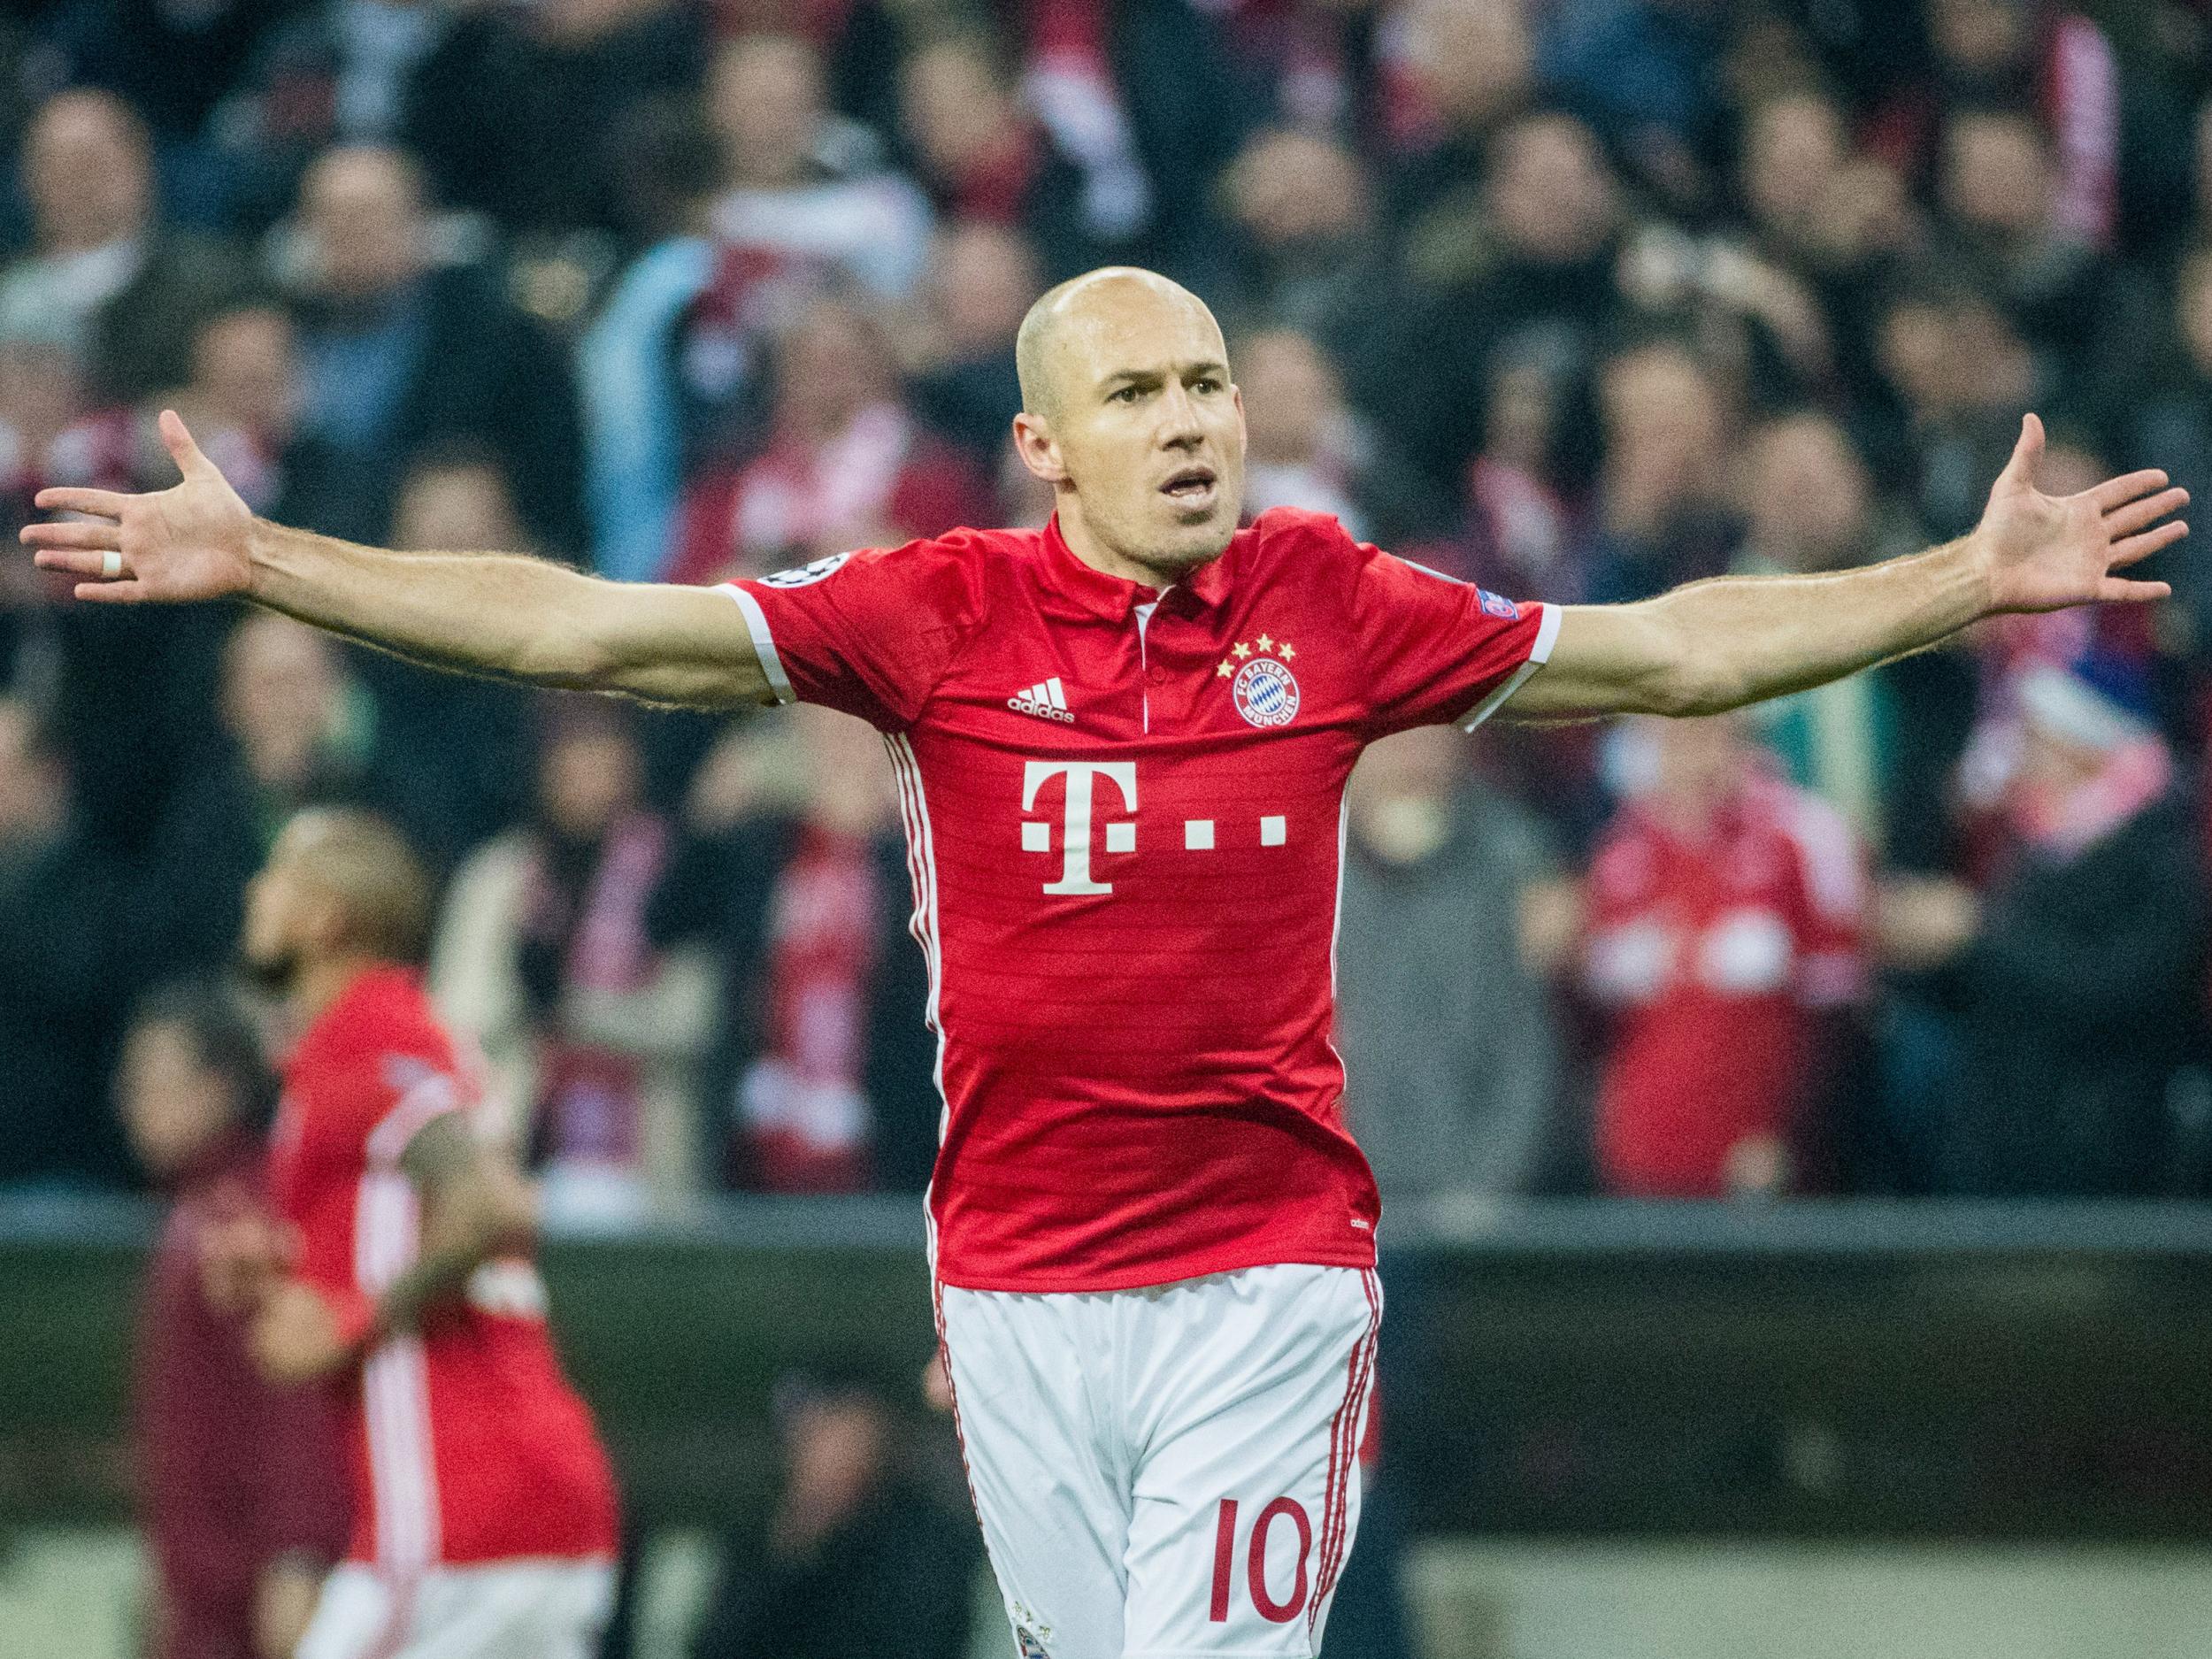 Arjen Robben was at the heart of everything Bayern did well on Wednesday night